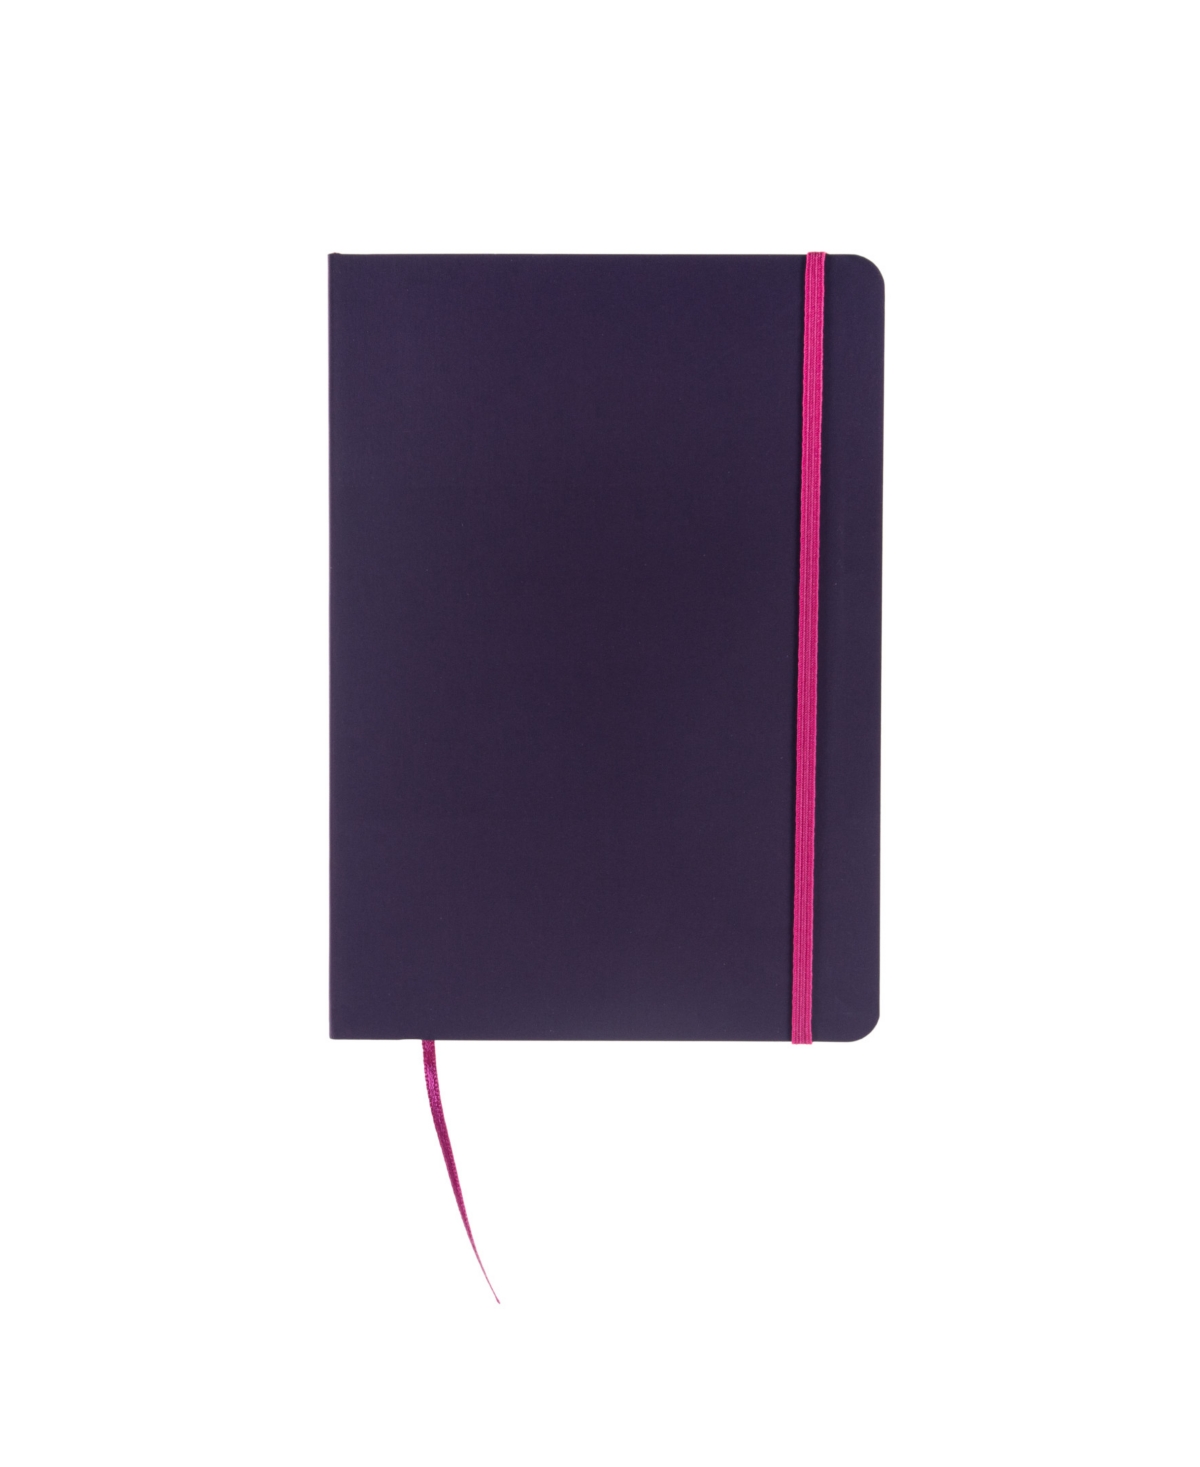 Ispira Hard Cover Dotted A5 Notebook, 5.8" x 8.3" - Purple